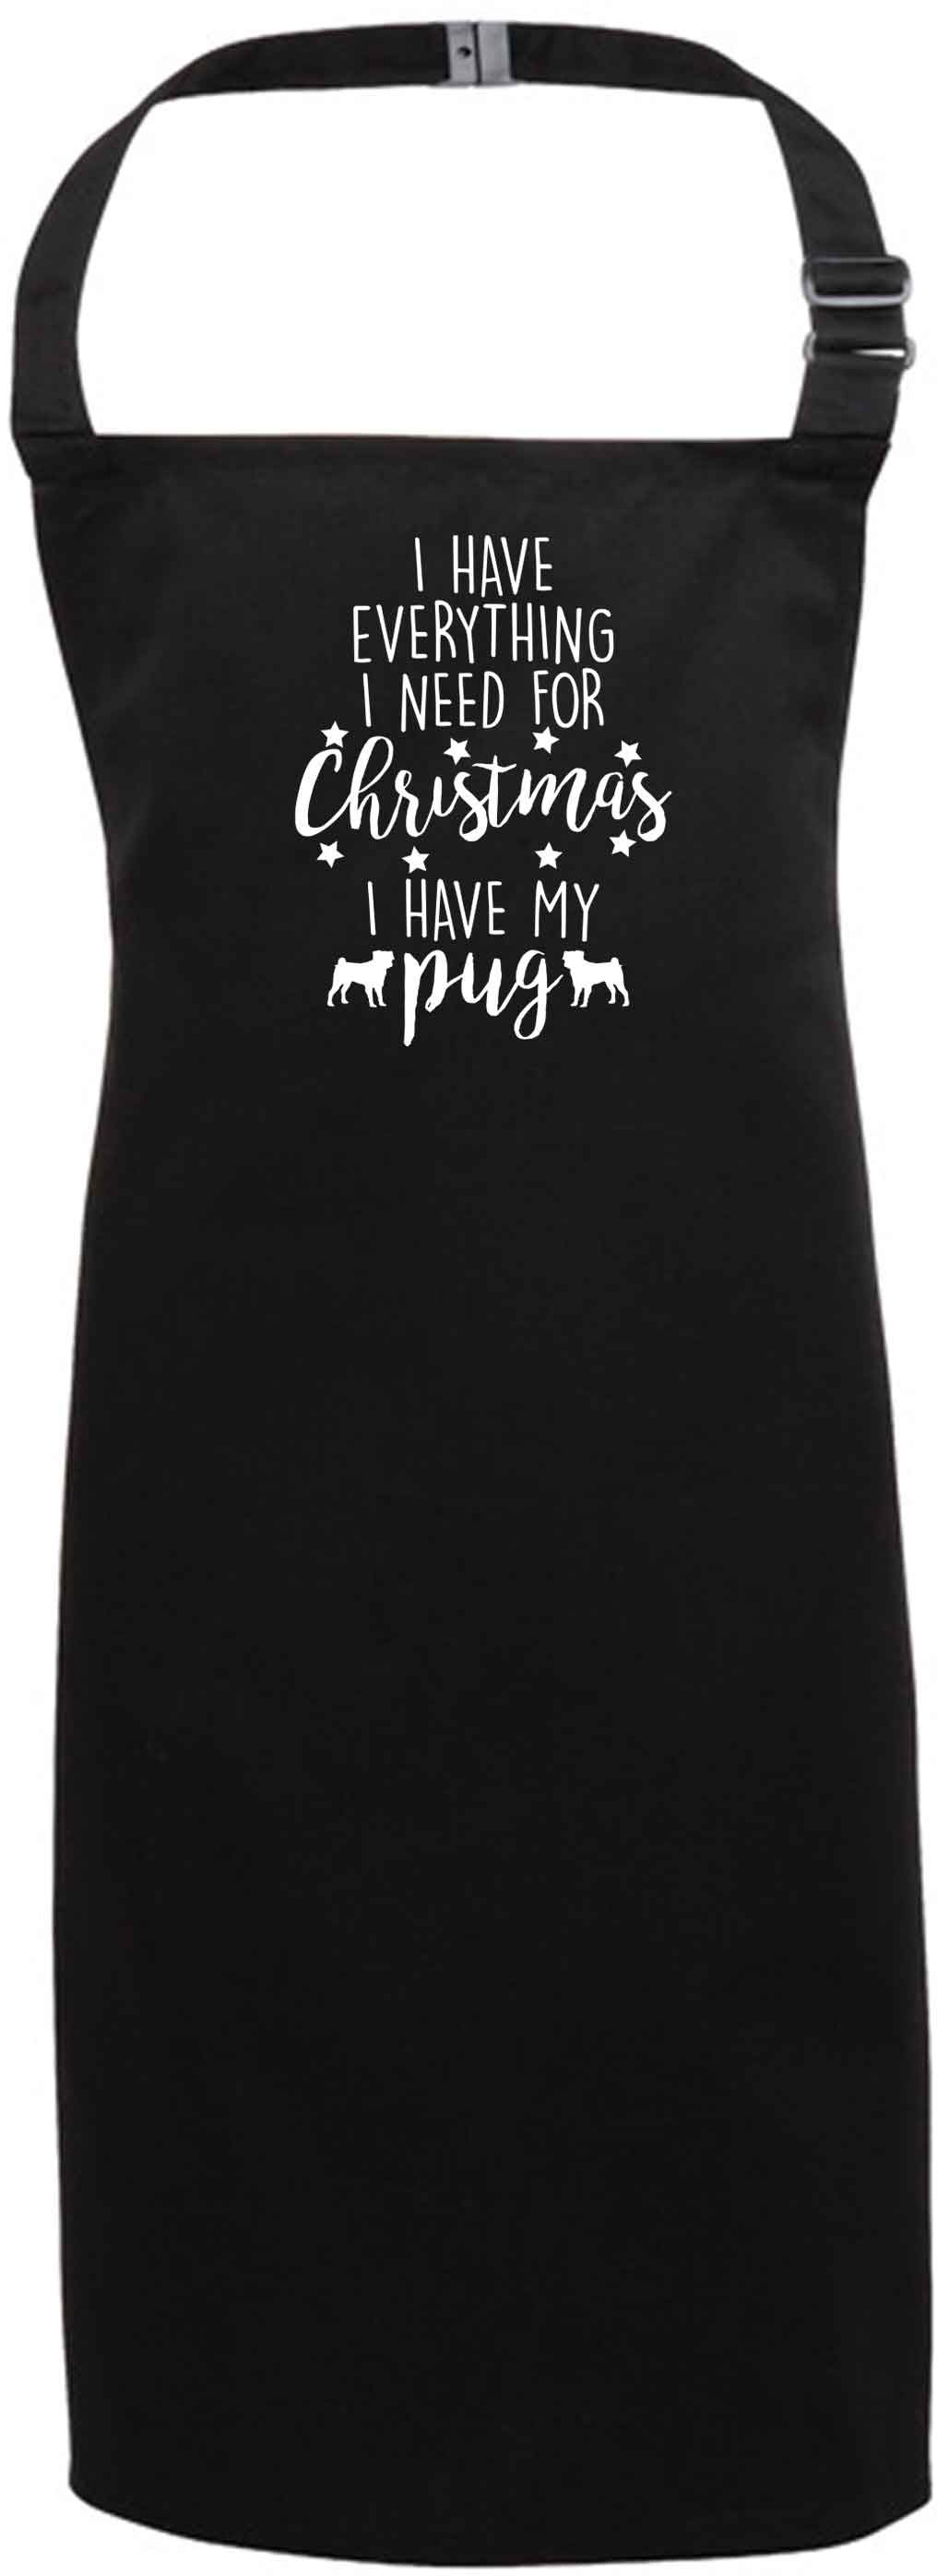 I have everything I need for Christmas I have my pug black apron 7-10 years